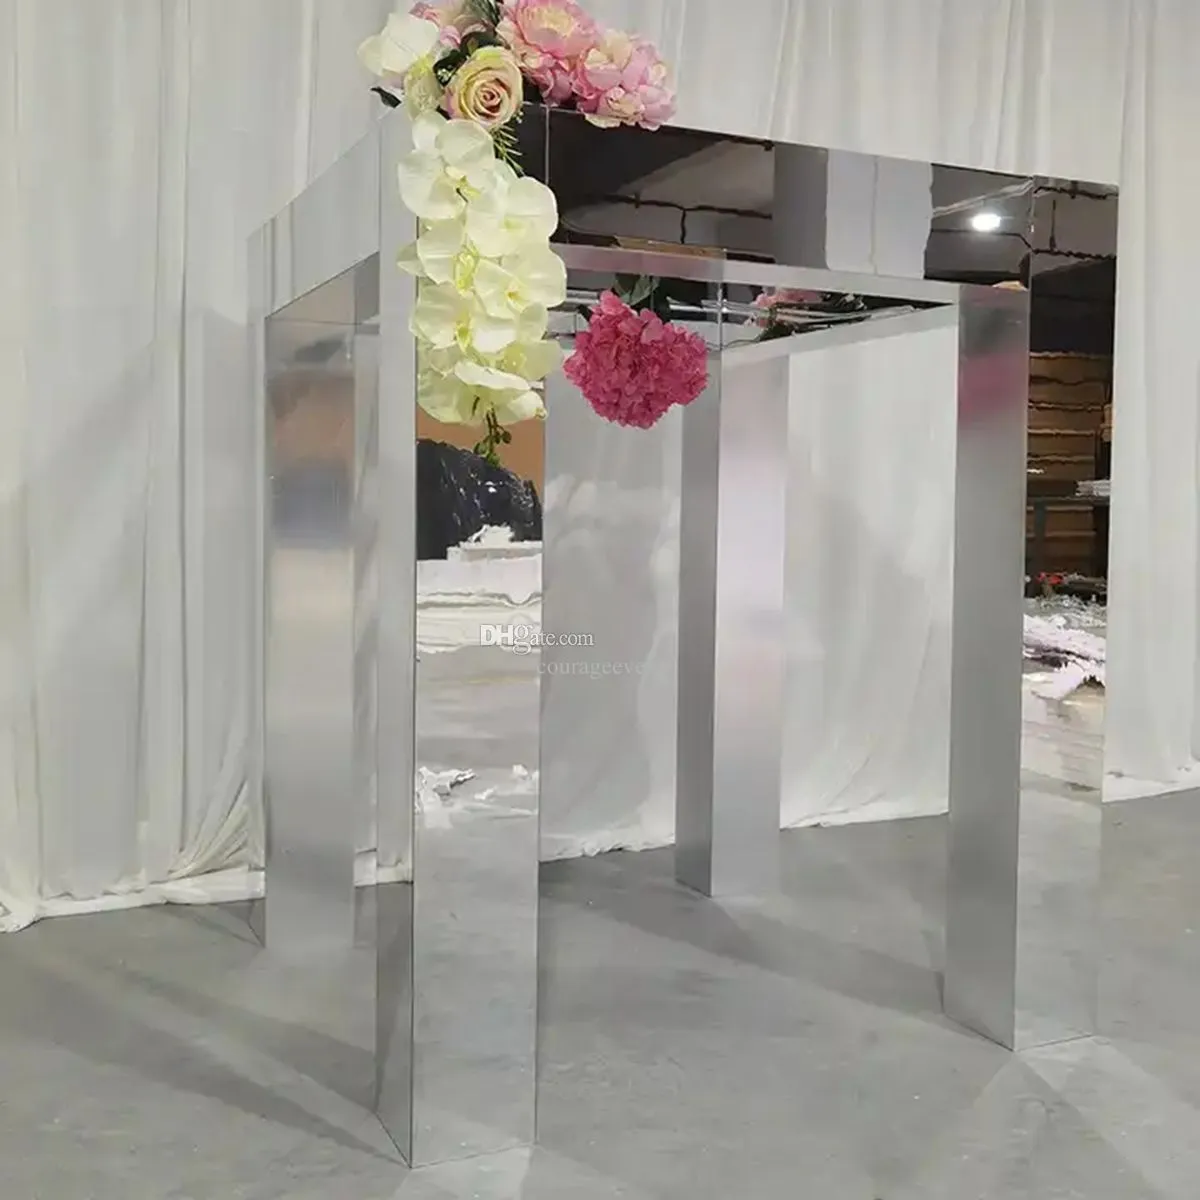 3 feet x 3 feet tall)one set like picture) Crystal Candelabra Wedding Table Center For Centerpieces Flower stand Wedding table Decoration Mirror Pillars